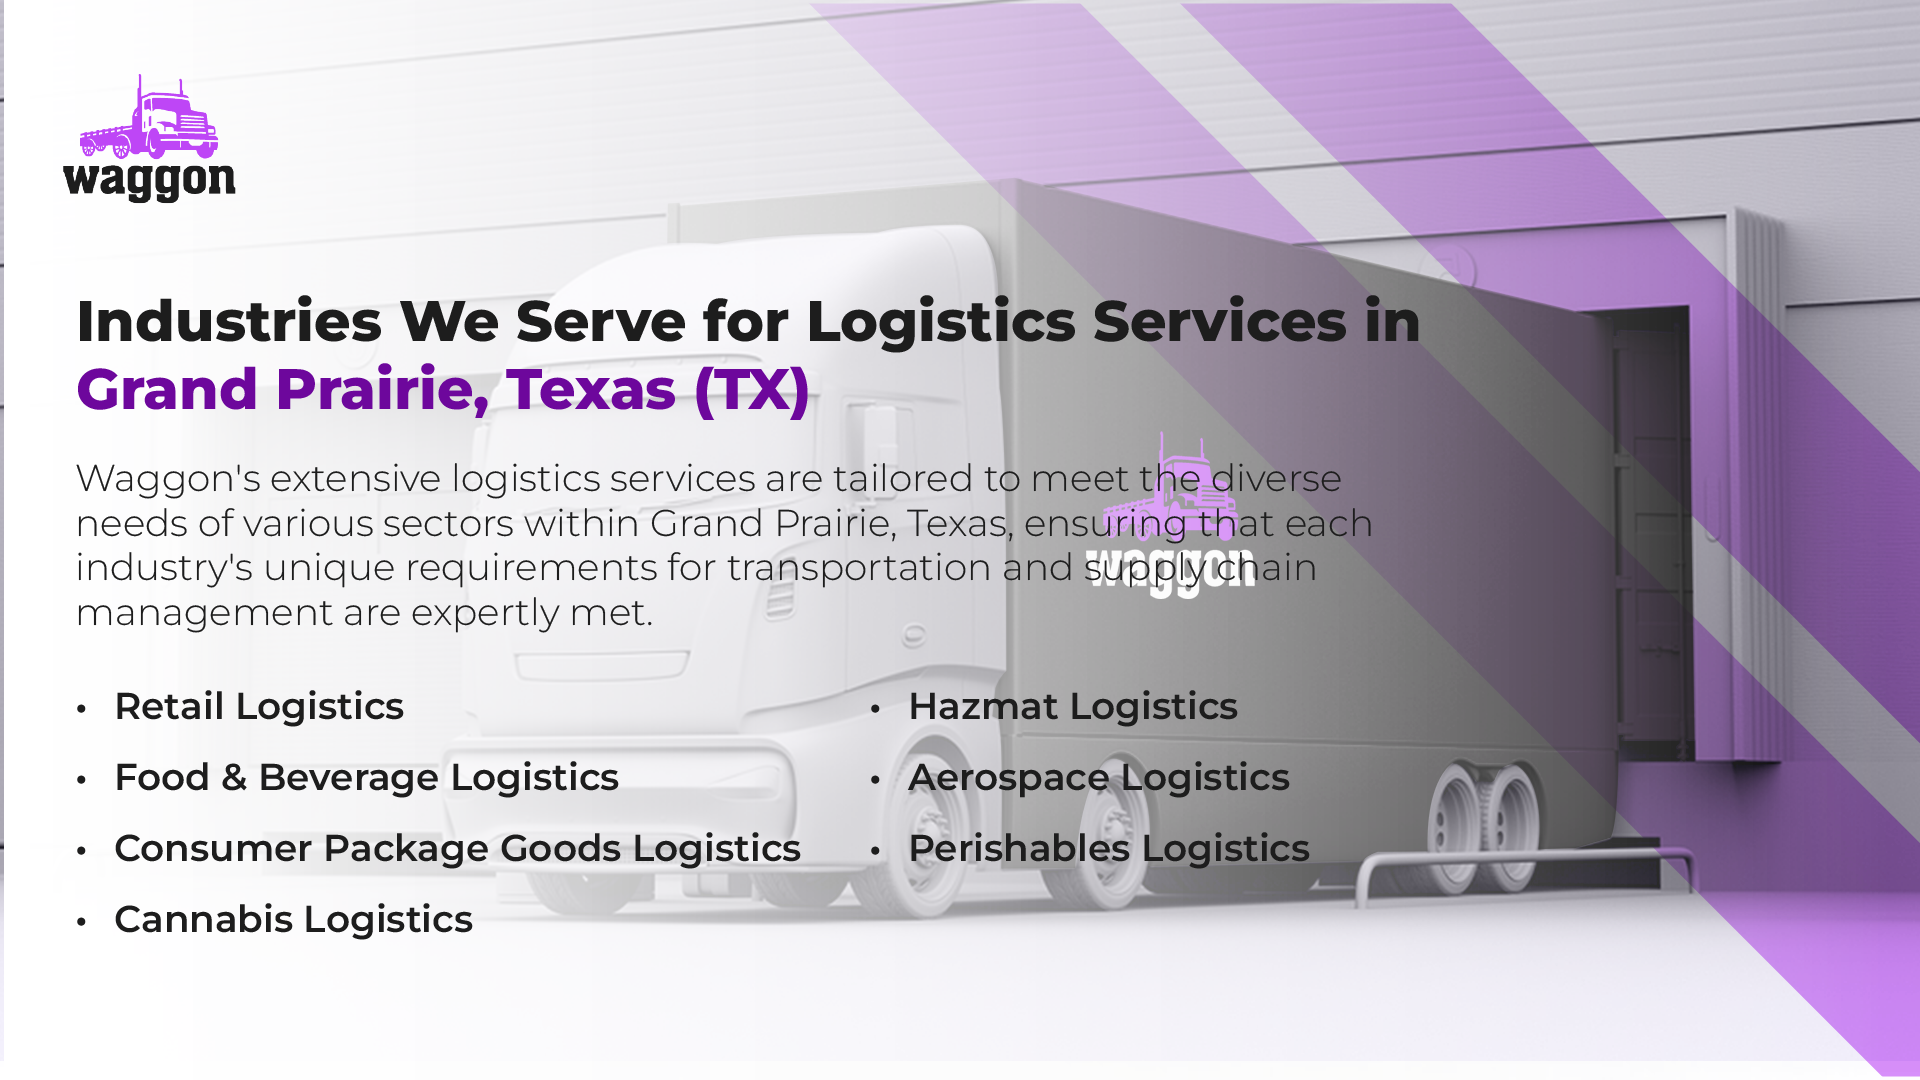 Industries We Serve for Logistics Services in Grand Prairie, Texas (TX)